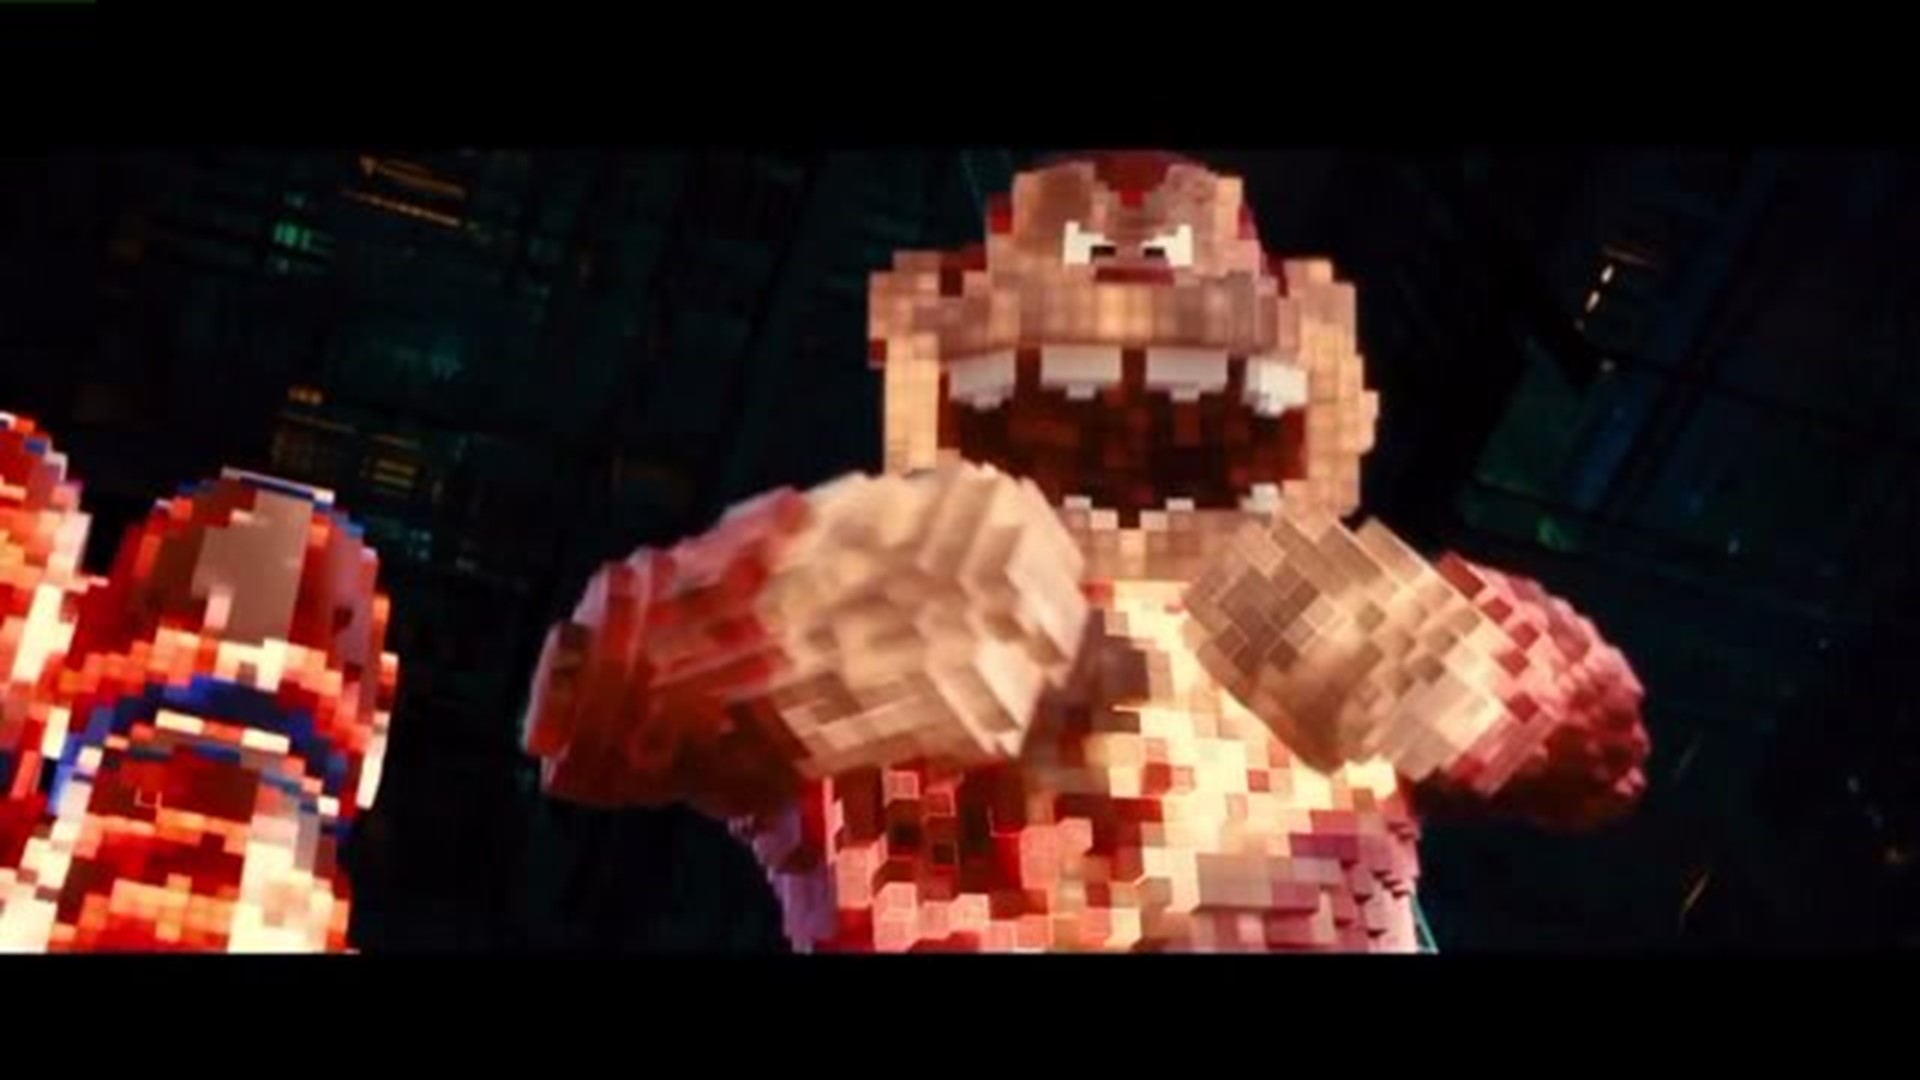 Steve at the movies; Pixels and Mr. Holmes previews